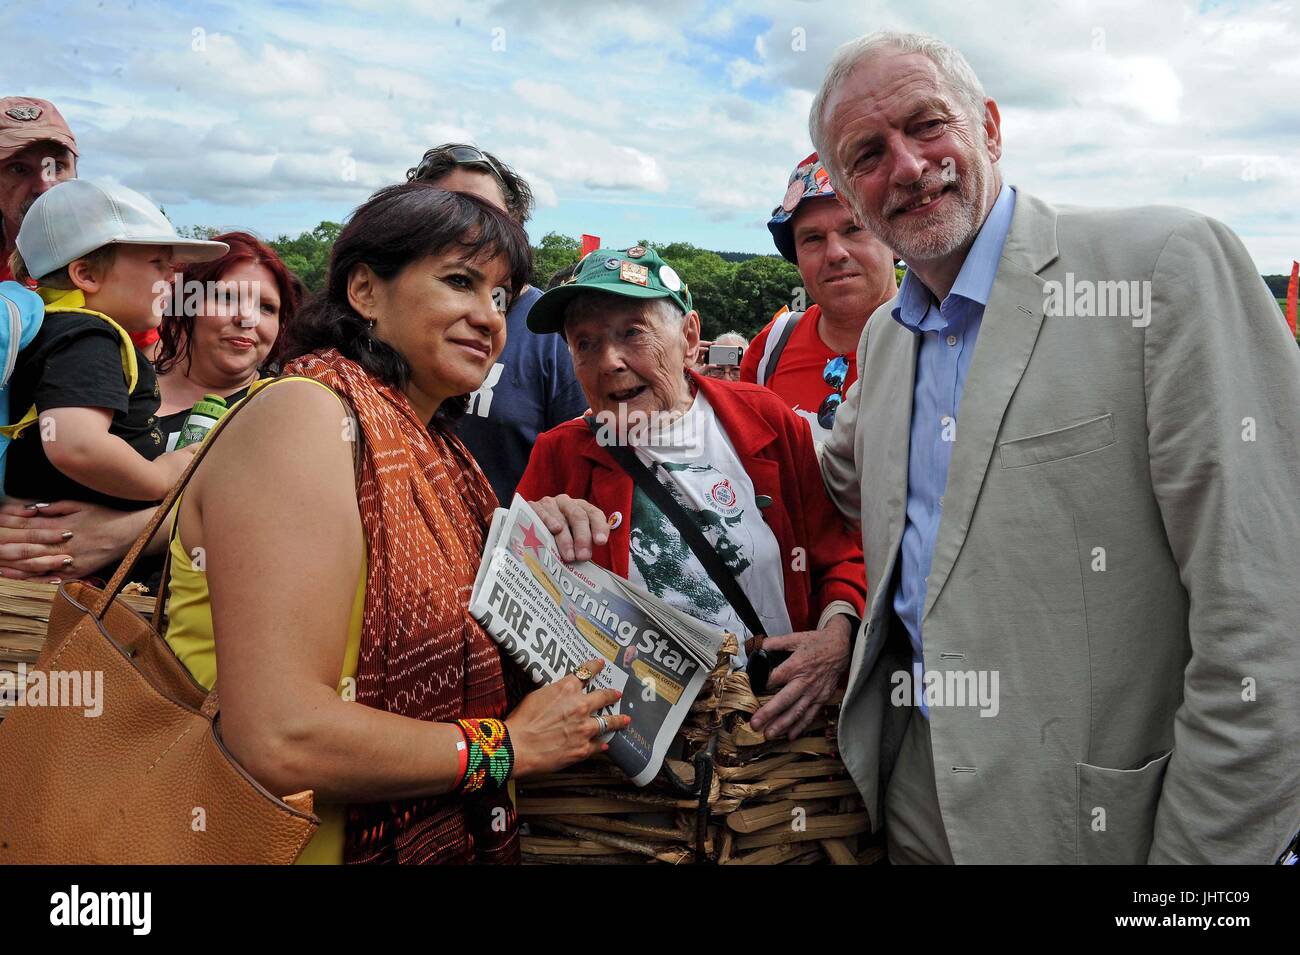 Jeremy Corbyn MP, Labour leader at the Tolpuddle Martyrs Day Festival, Dorset, UK Credit: Finnbarr Webster/Alamy Live News Stock Photo